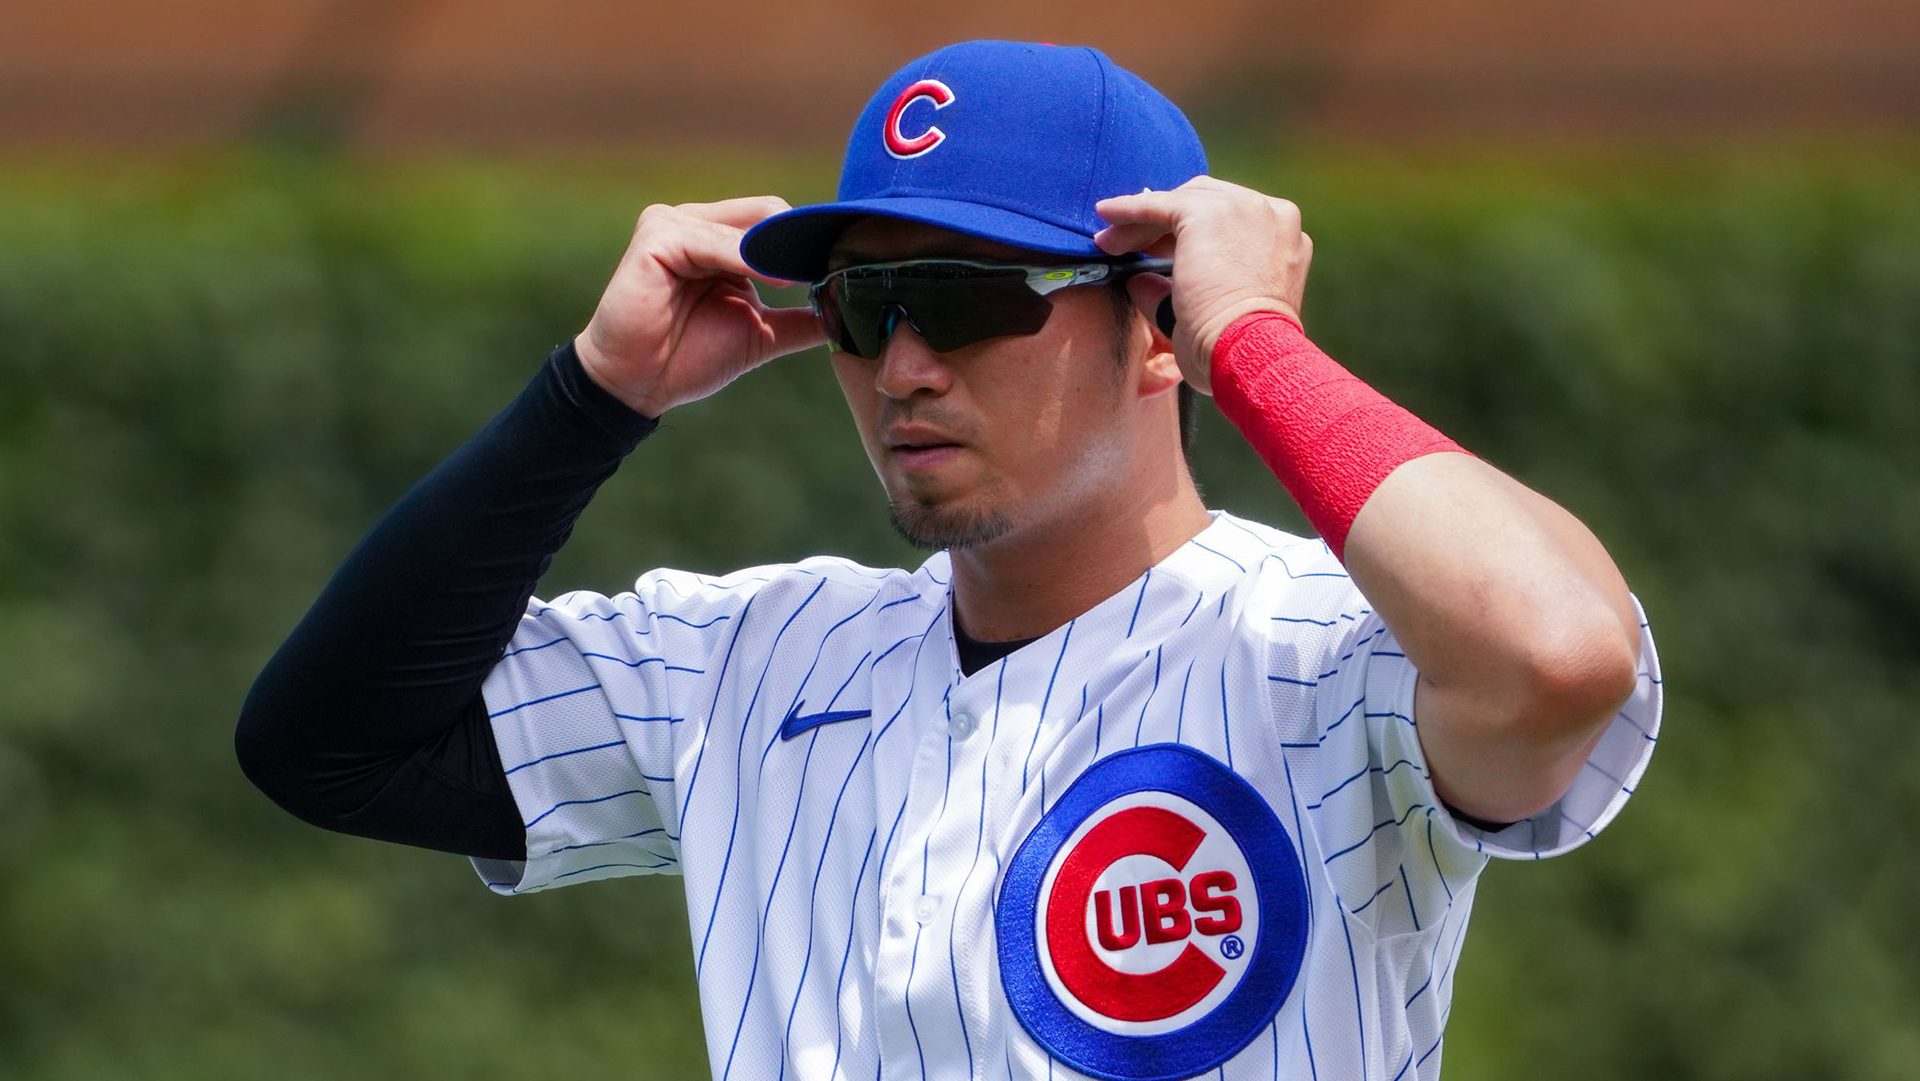 Seiya Suzuki materializing into the player the Cubs thought he was when